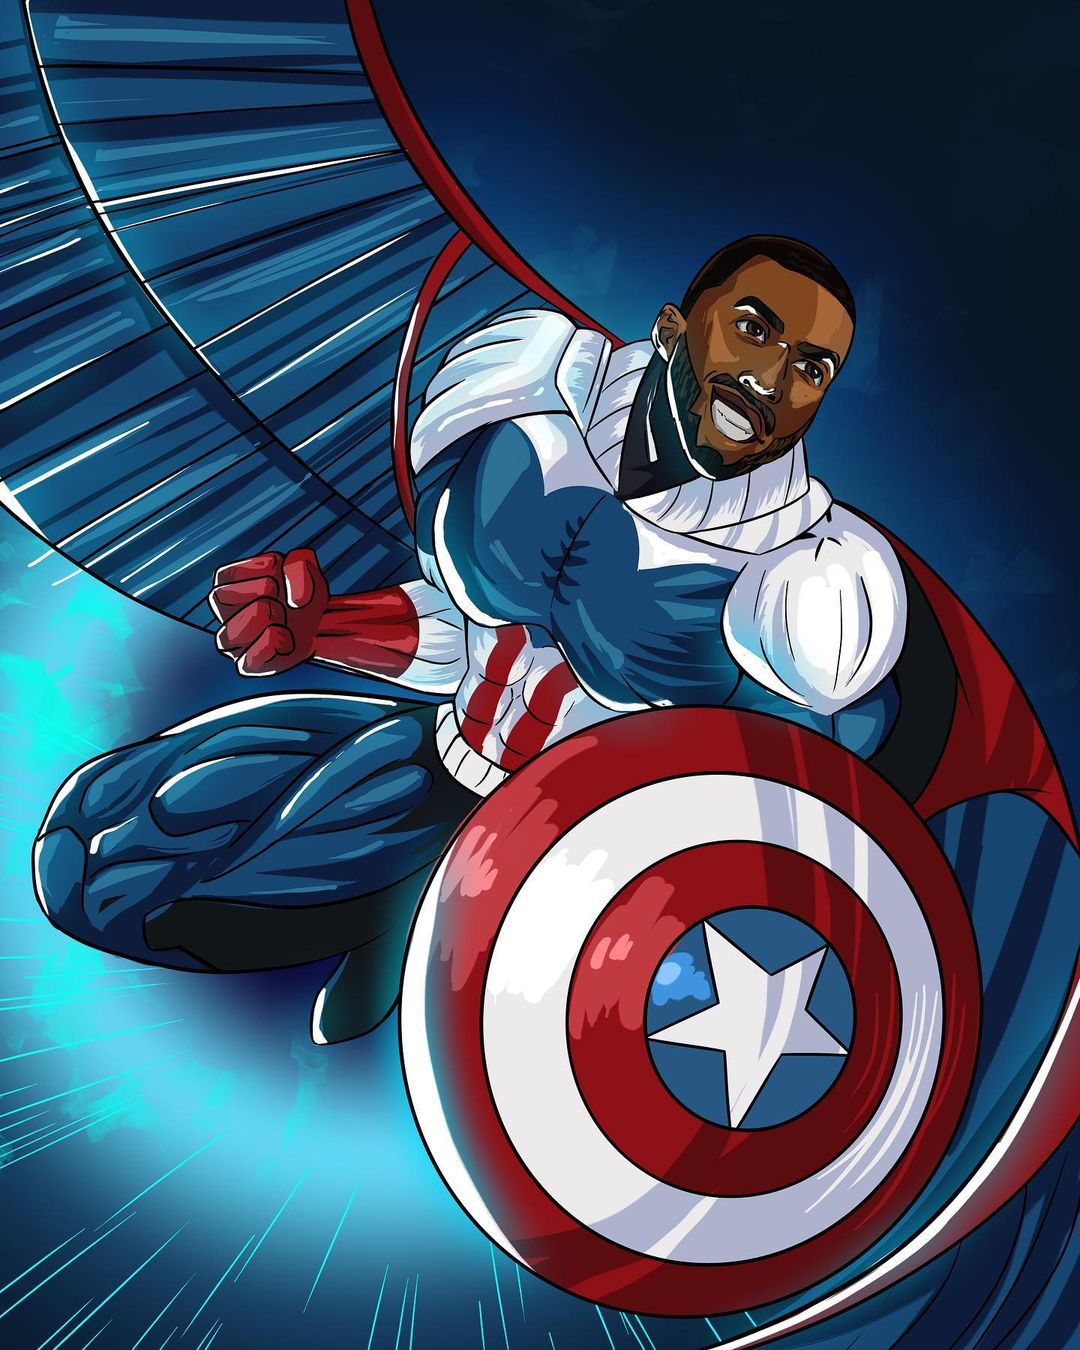 Kyle Pitts as Captain America 
(designed by @anshi.sportrait)...